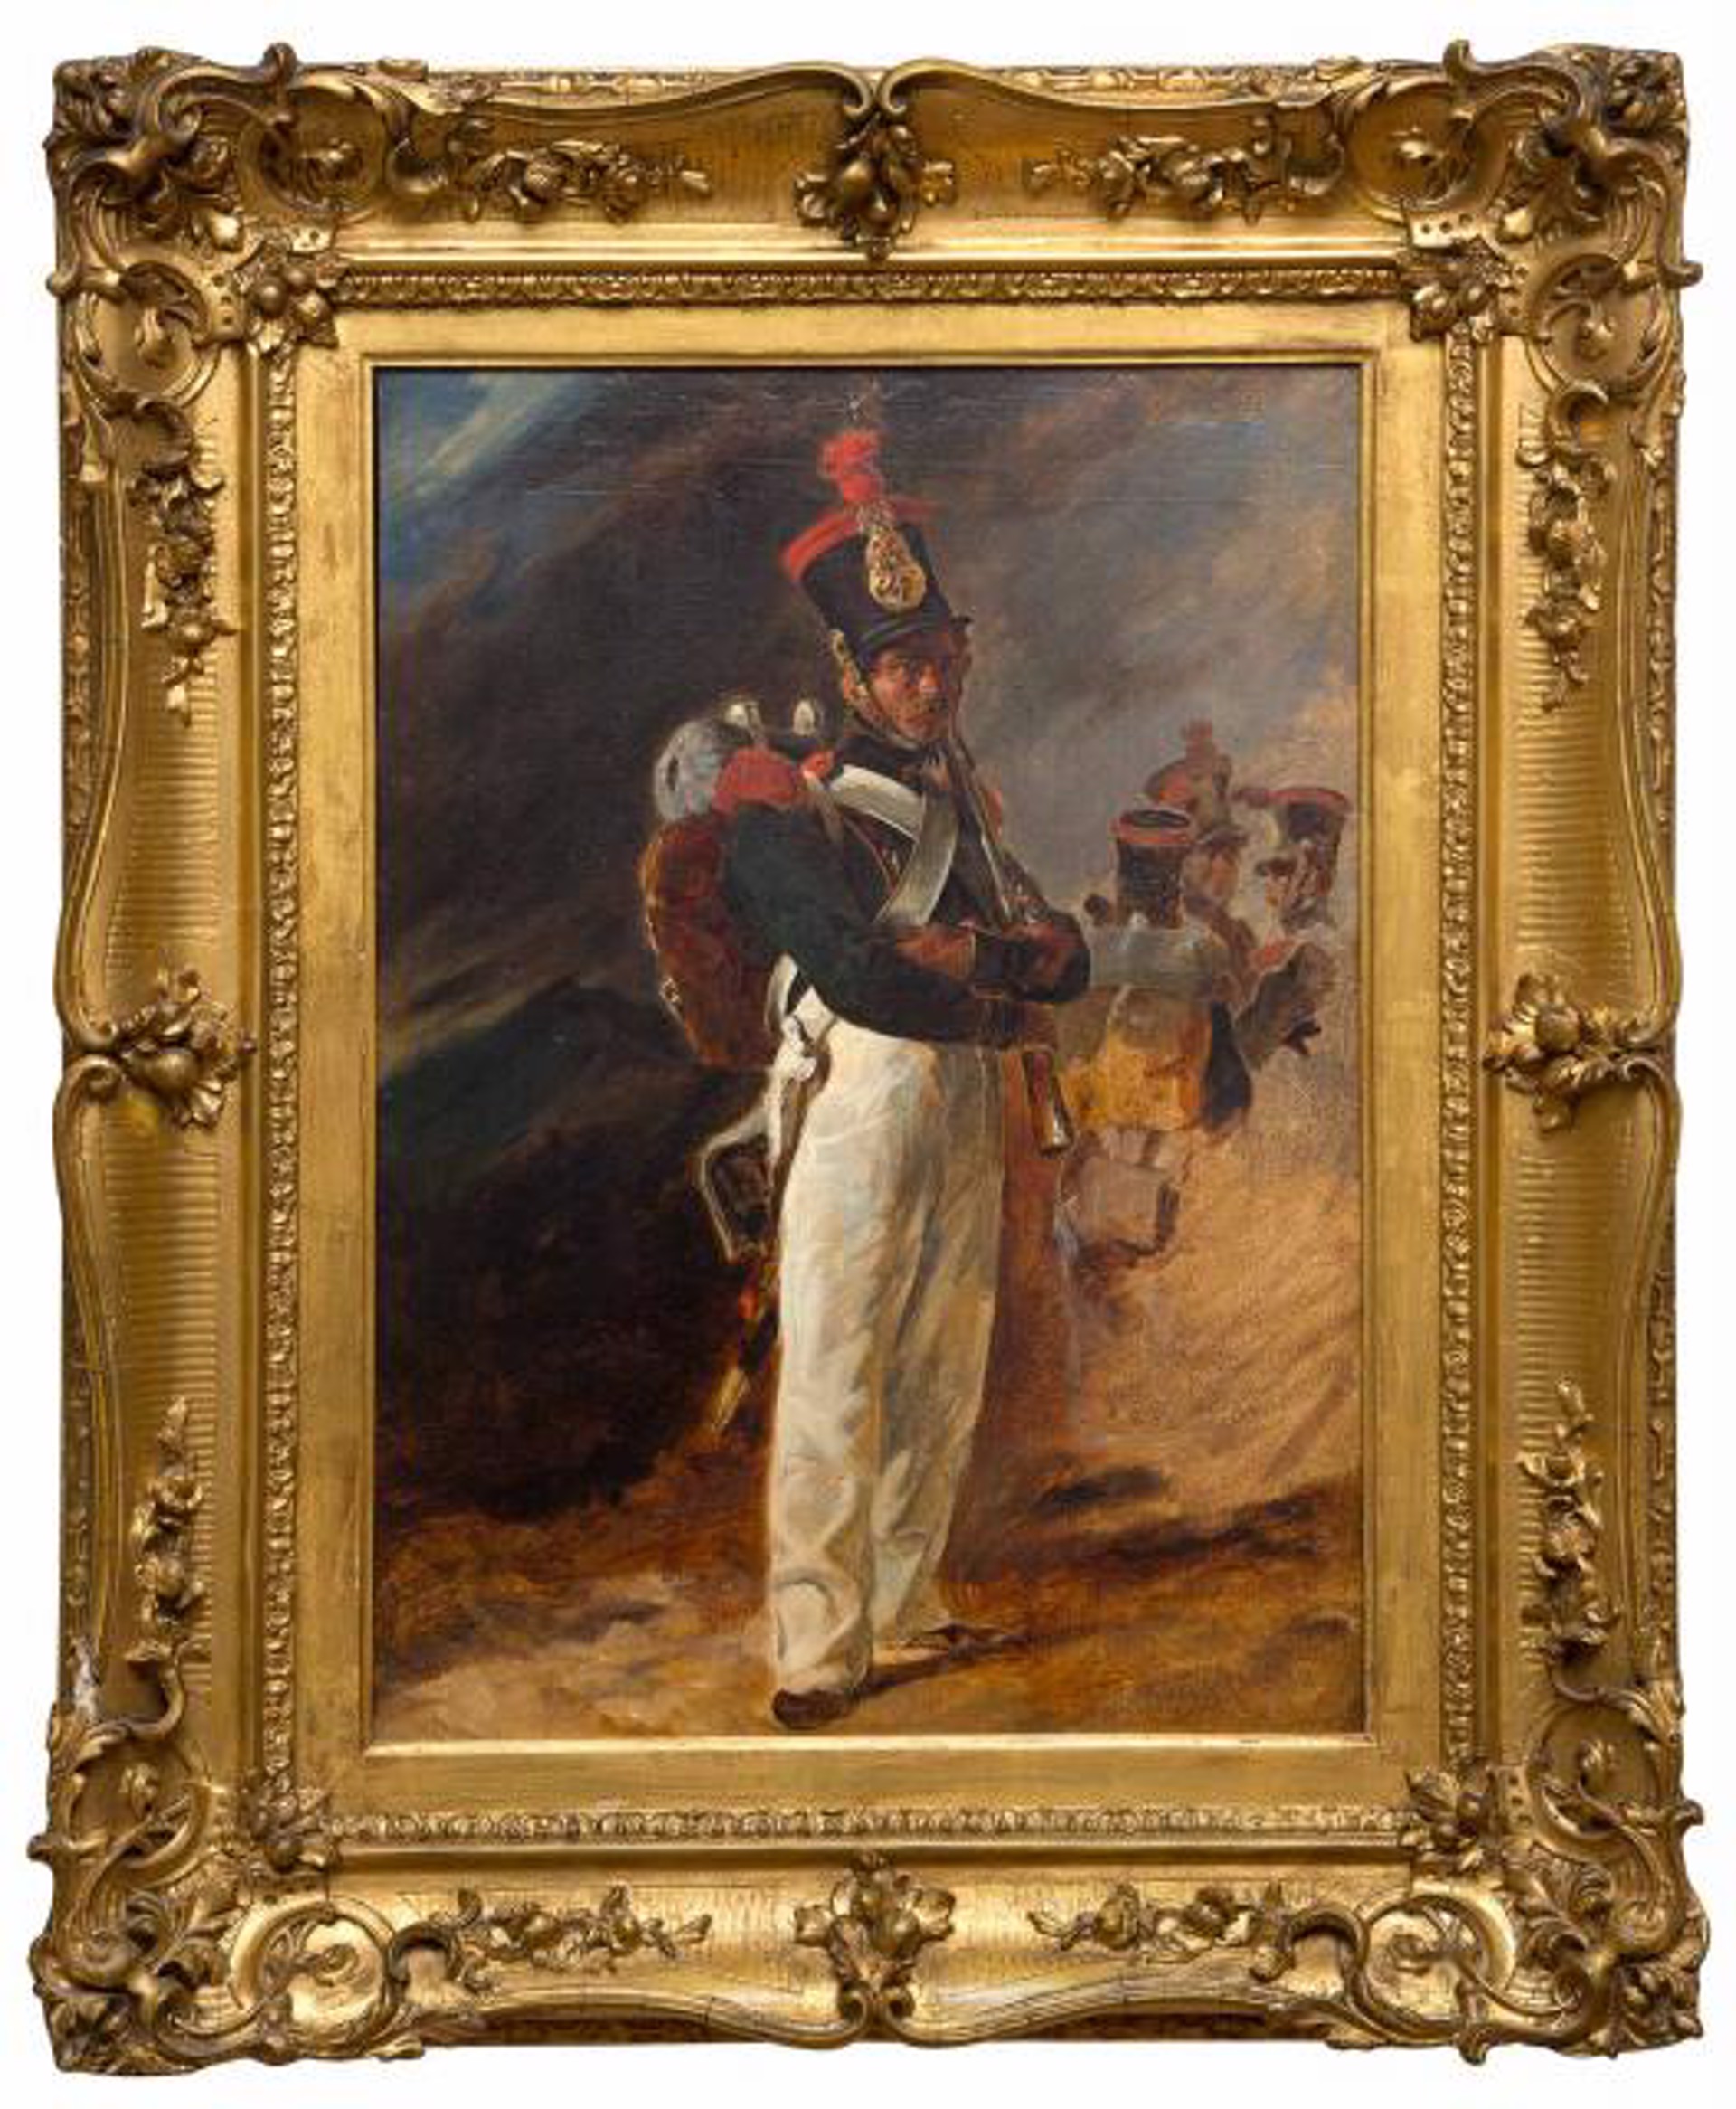 STANDING SOLDIER by Horace Vernet